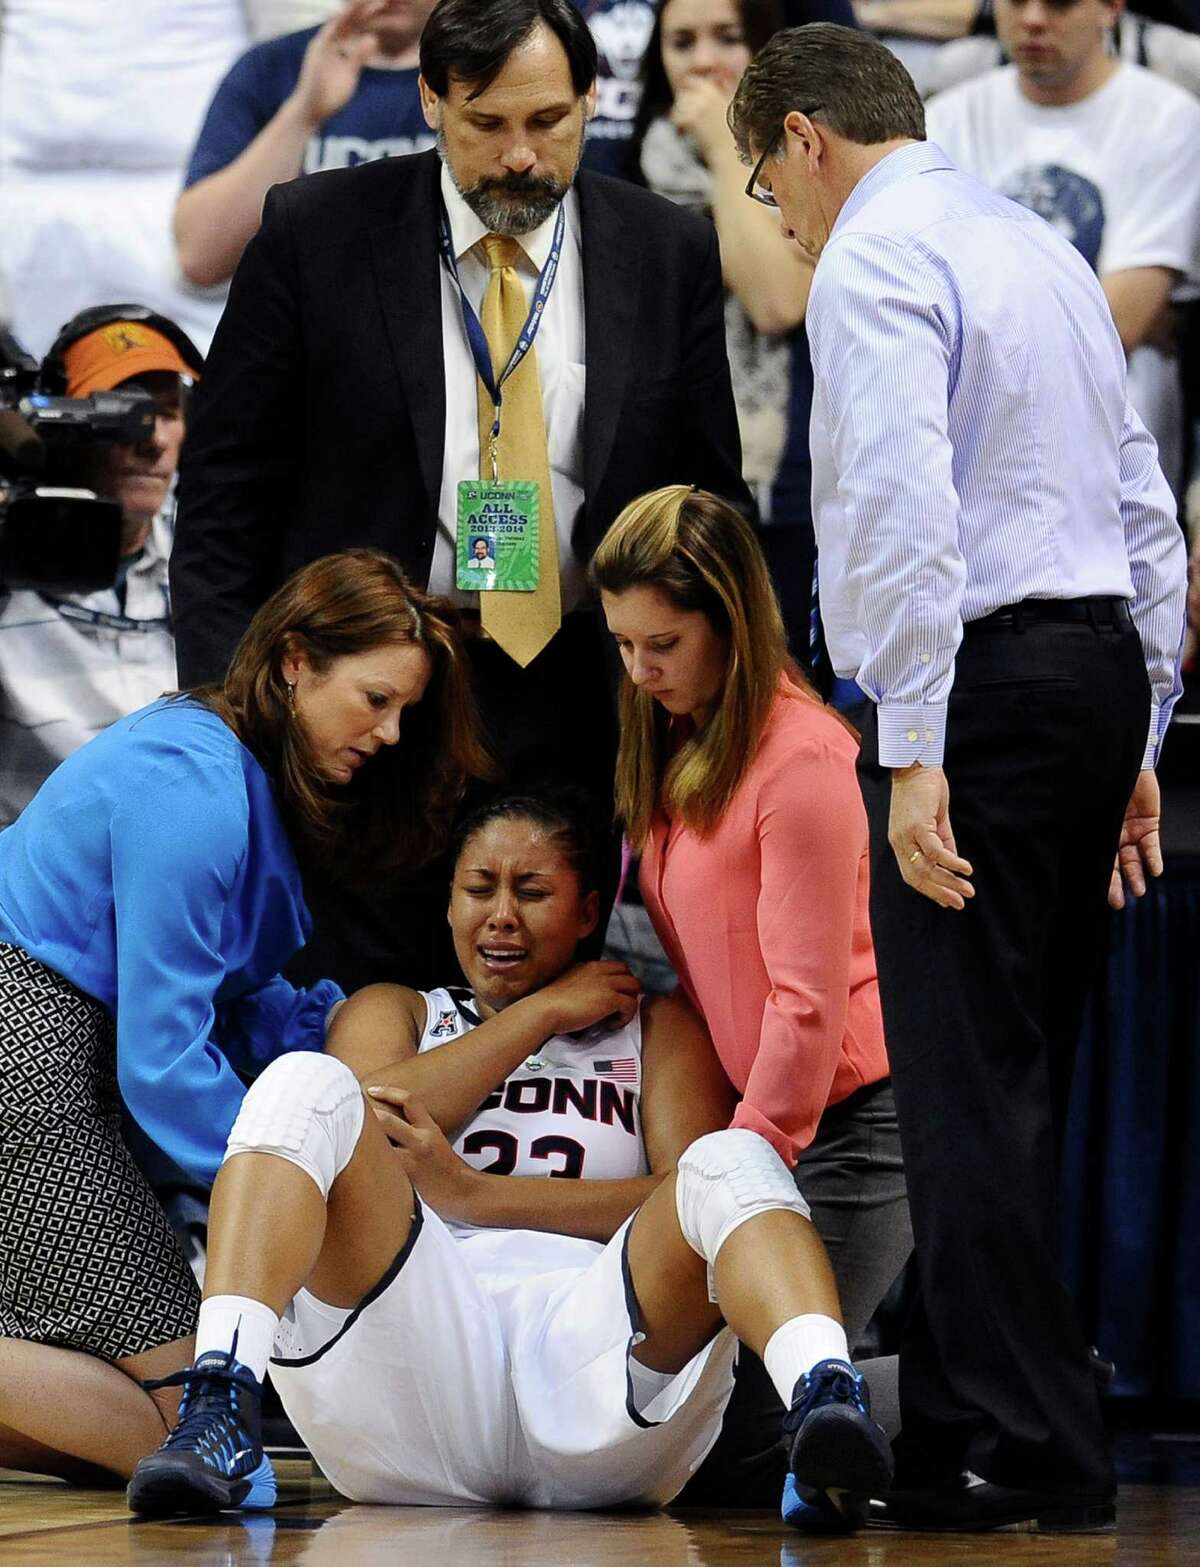 Connecticut head coach Geno Auriemma, right, looks at injured player Kaleena Mosqueda-Lewis, center, as she is tended to by assistant athletic trainer Rosemary Ragle, left, Team Physician Dr. Thomas Trojian, top center, and student athletic trainer Lauren Sheldon, second from right, during the second half of an NCAA college basketball game, Monday, Nov. 11, 2013, in Storrs, Conn. Mosqueda-Lewis left the game with an injury to her right elbow. Connecticut won 76-57.